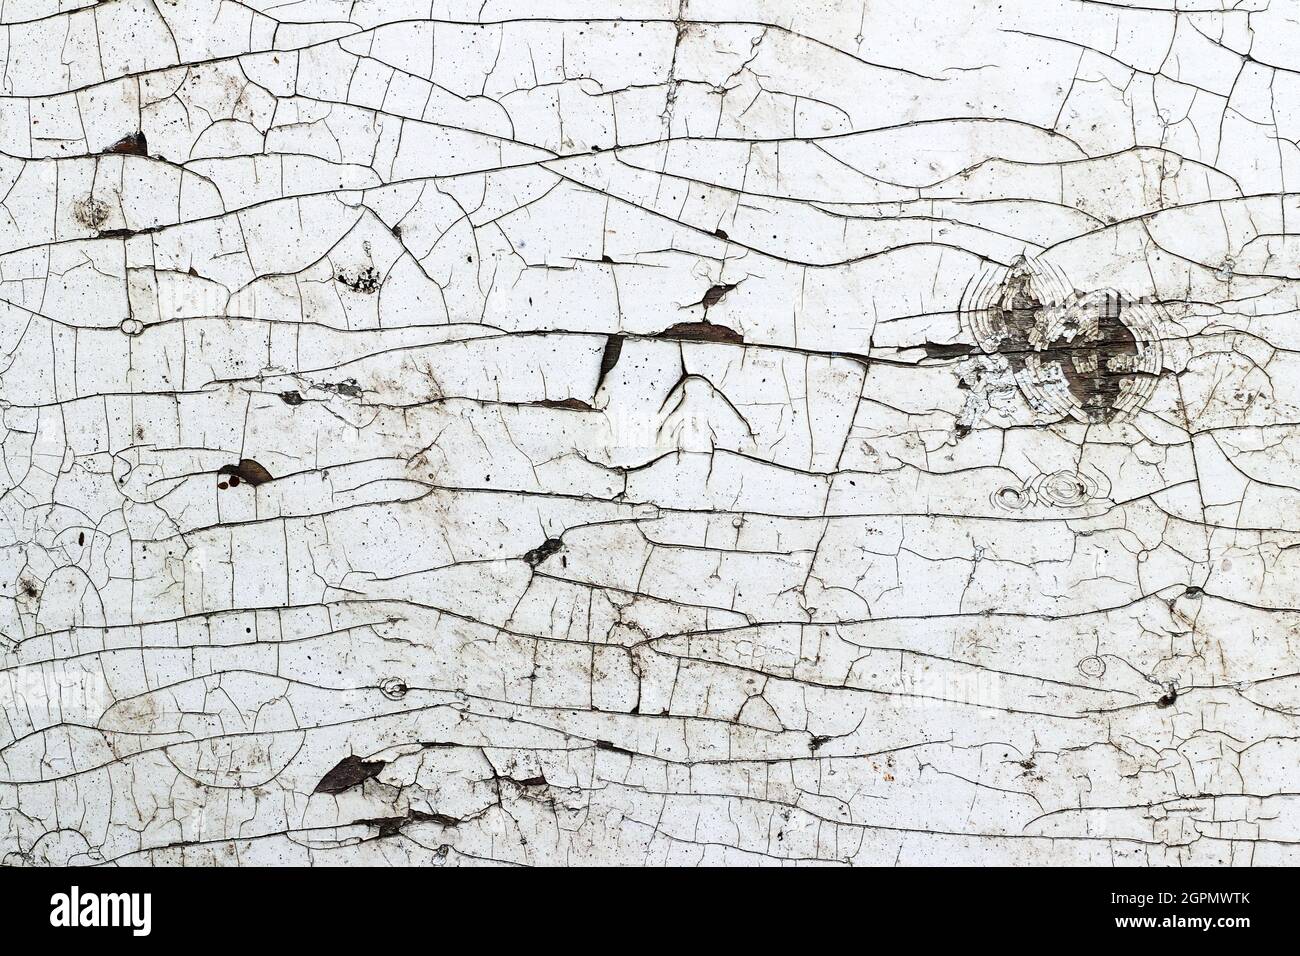 Detail of the fine cracks on the surface, cracked texture Stock Photo